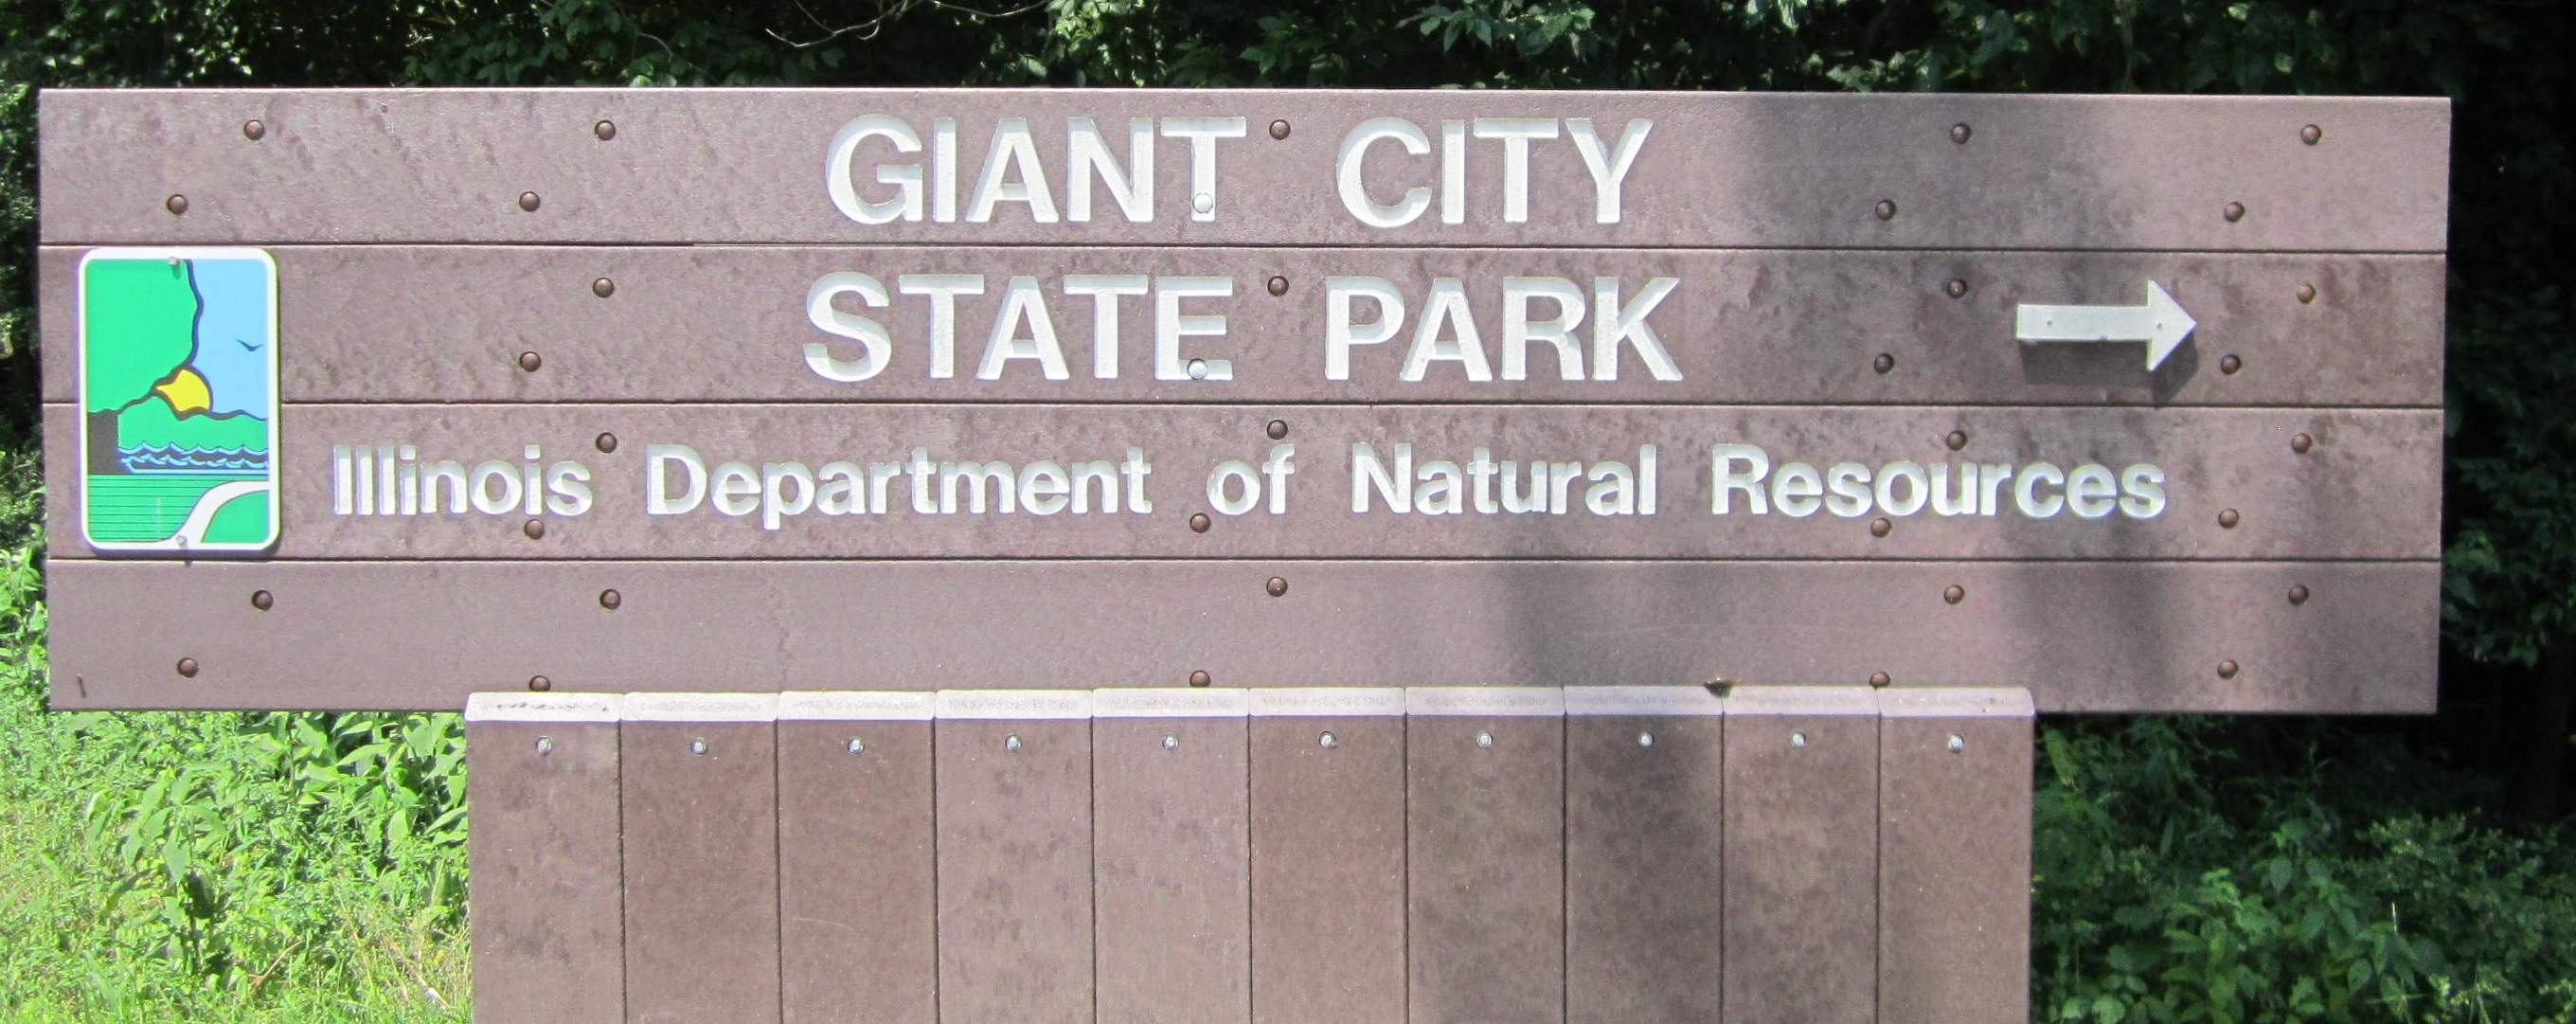 A sign pointing the way to Giant City State Park